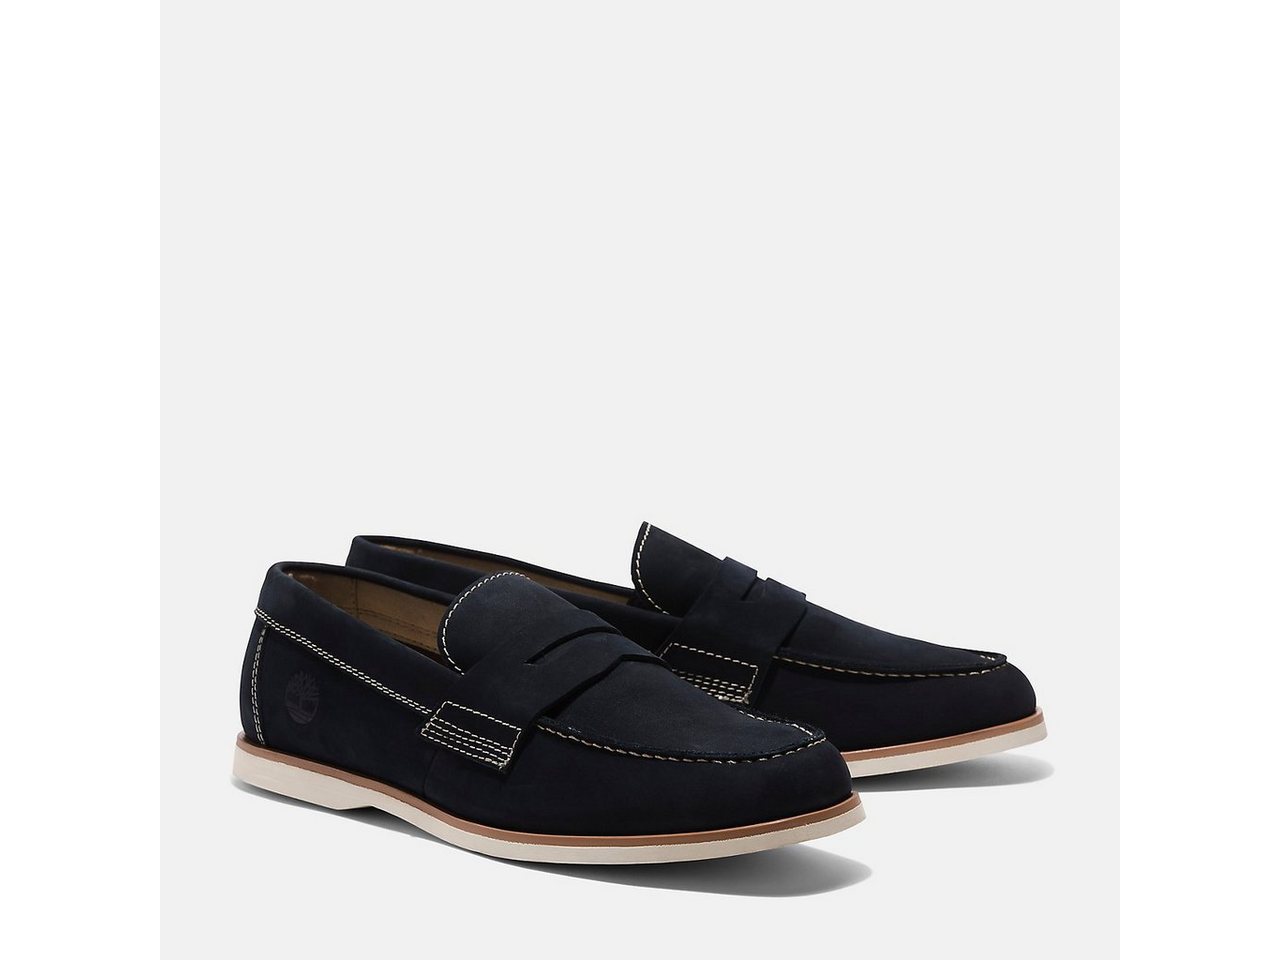 Timberland CLASSIC BOAT BOAT SHOE Bootsschuh von Timberland